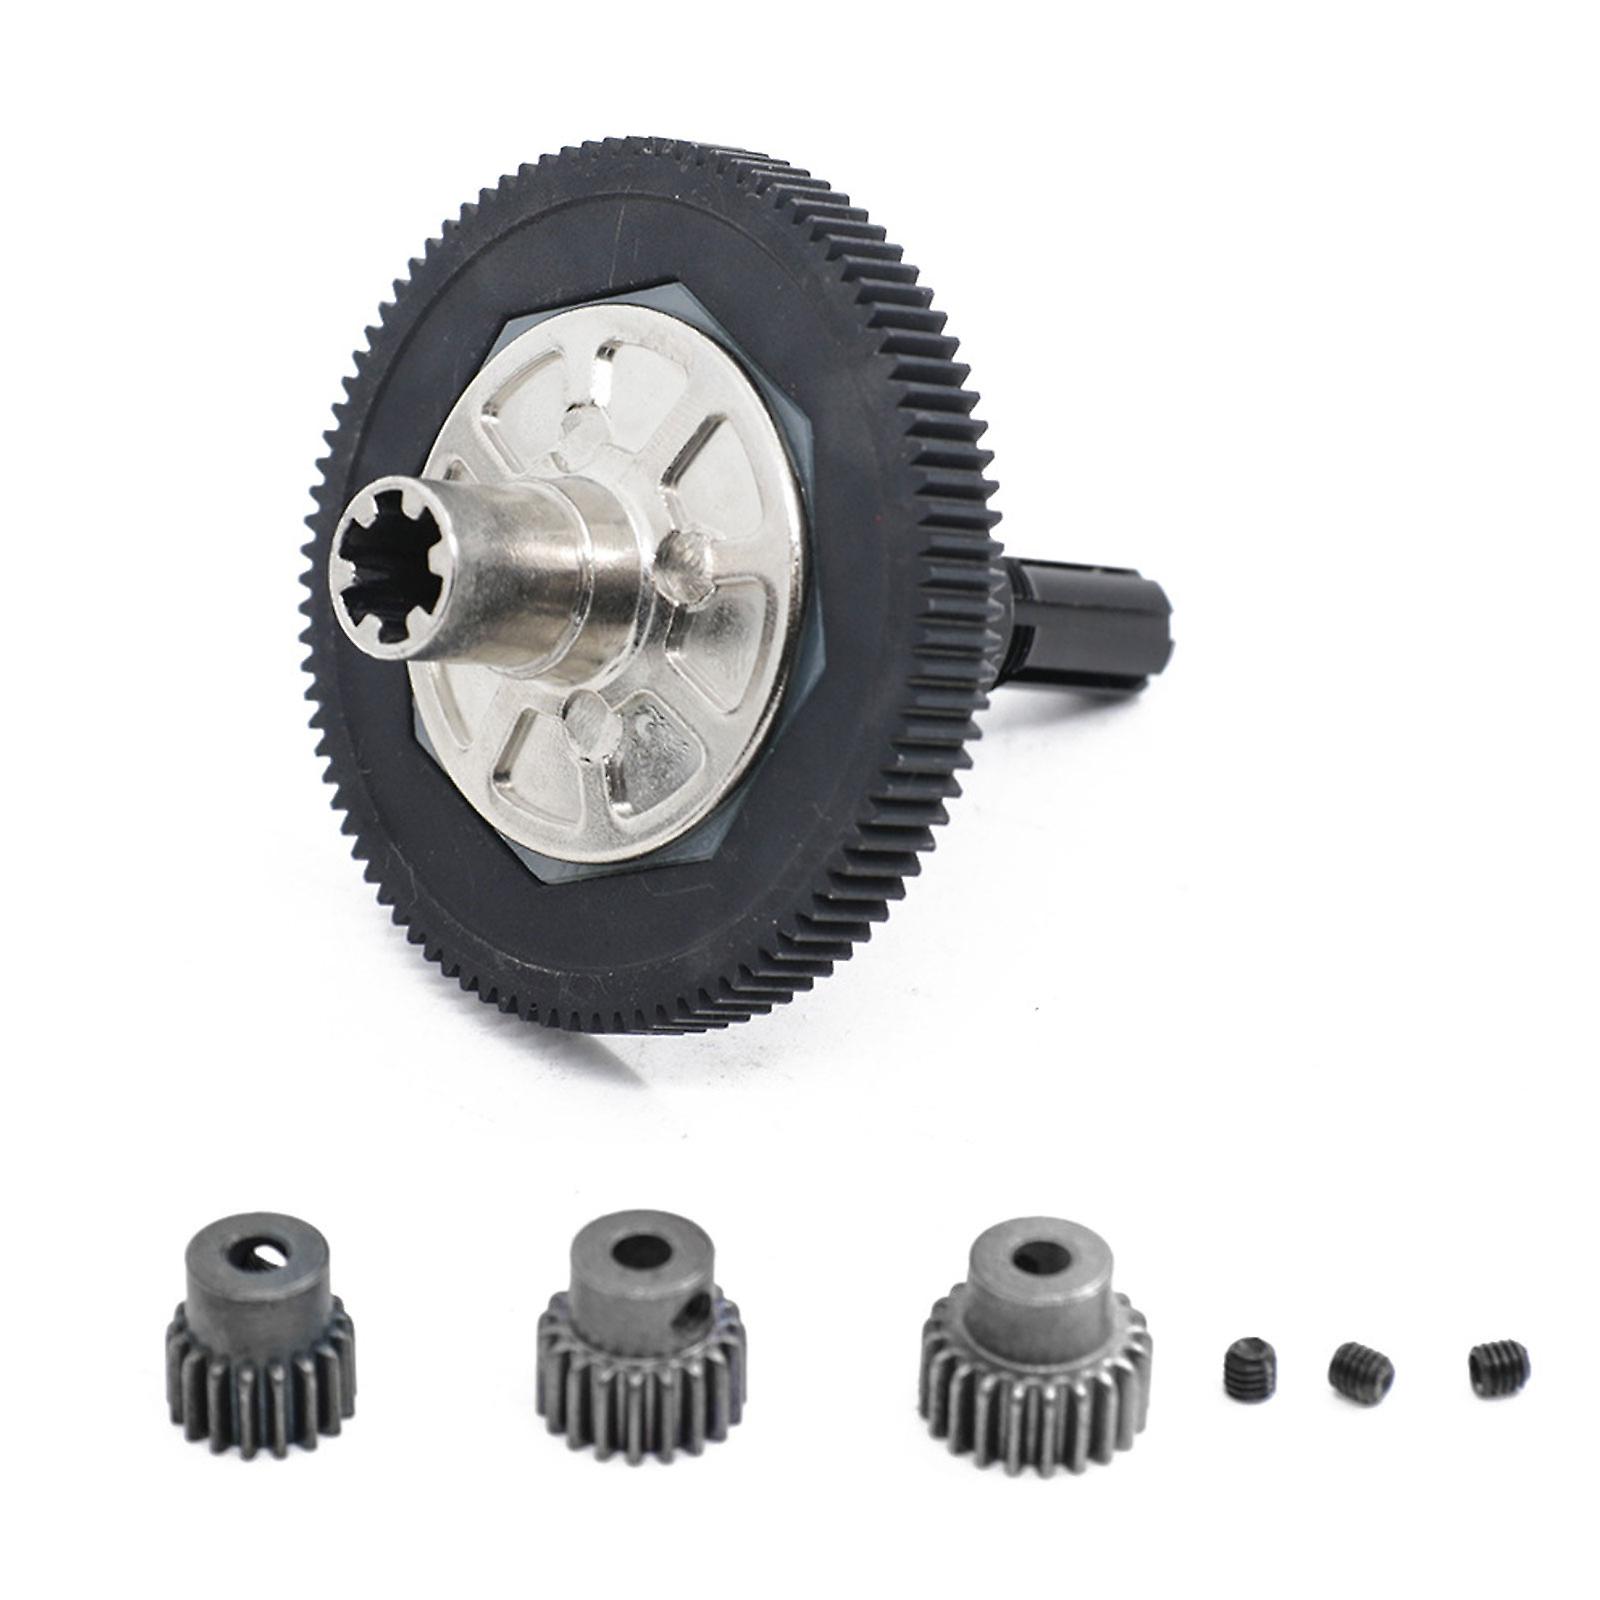 Traxxas Slash 4x4 new spur and slipper clutch assembly w/extra gears |  #3766646849